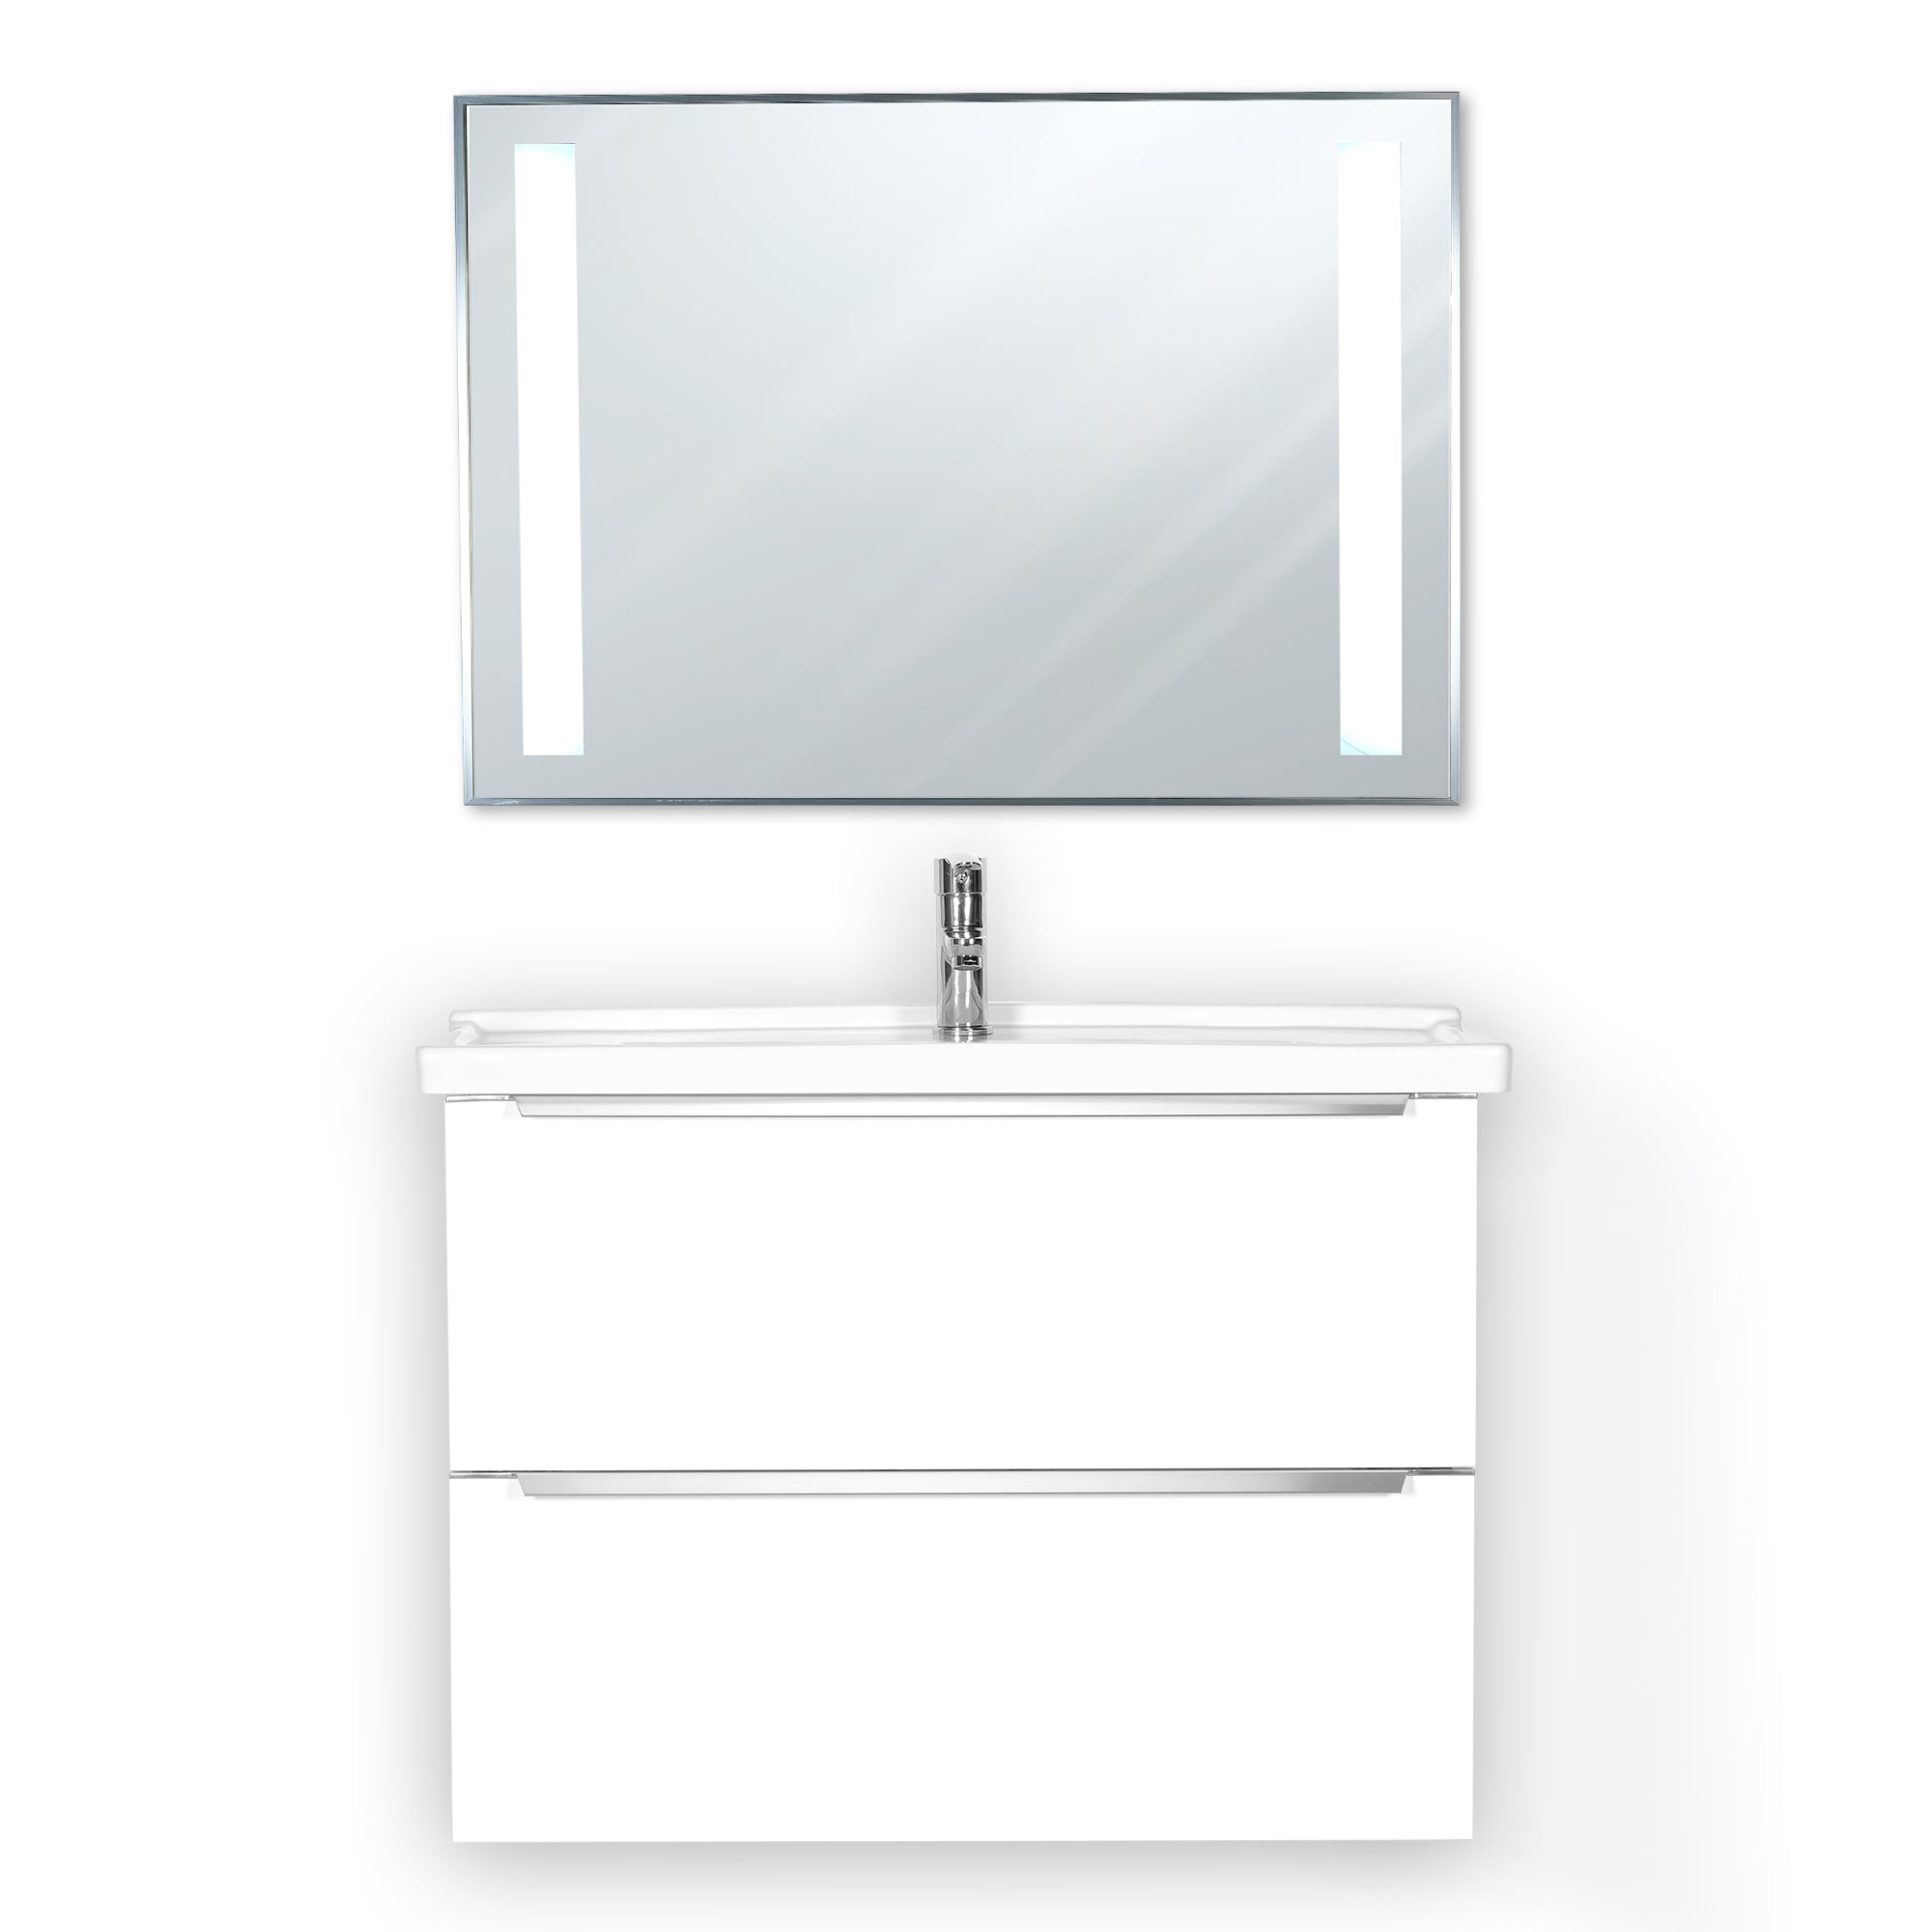 ARGENTO 32 INCH MODERN WALL MOUNT VANITY AND SINK COMBO - GLOSSY WHITE